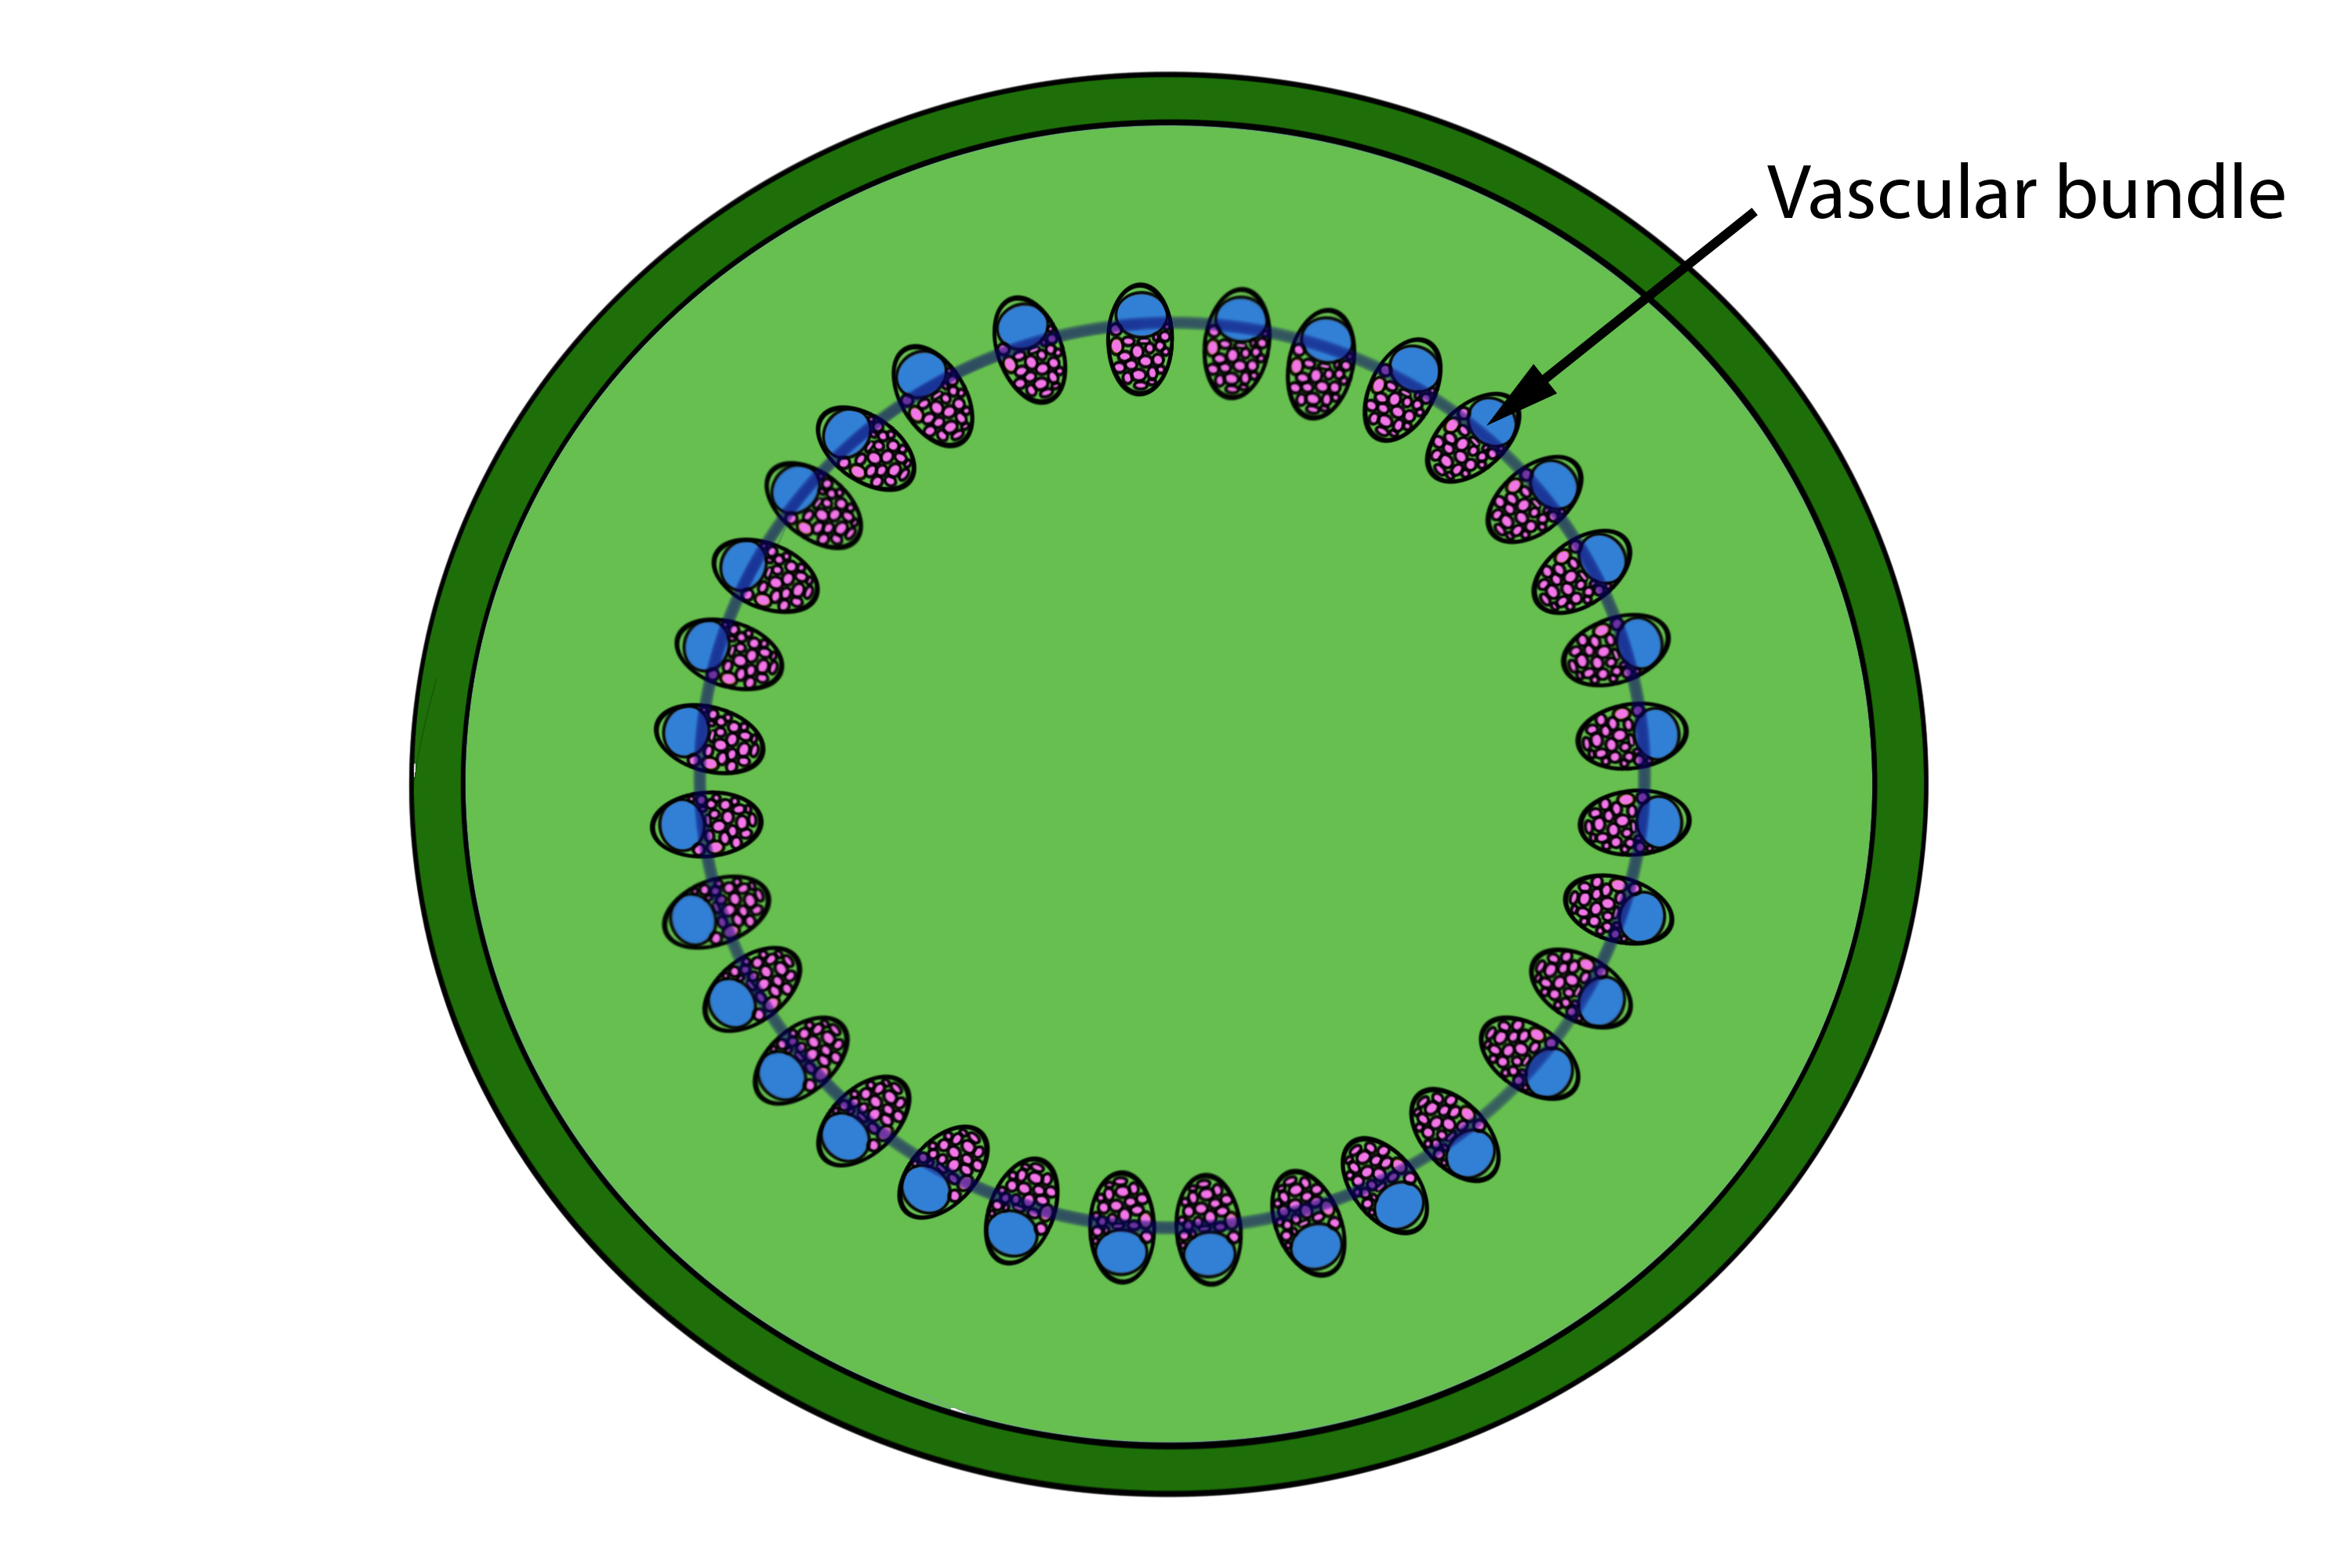 Cross section of a dicot stem showing the organised rings of vascular bundles